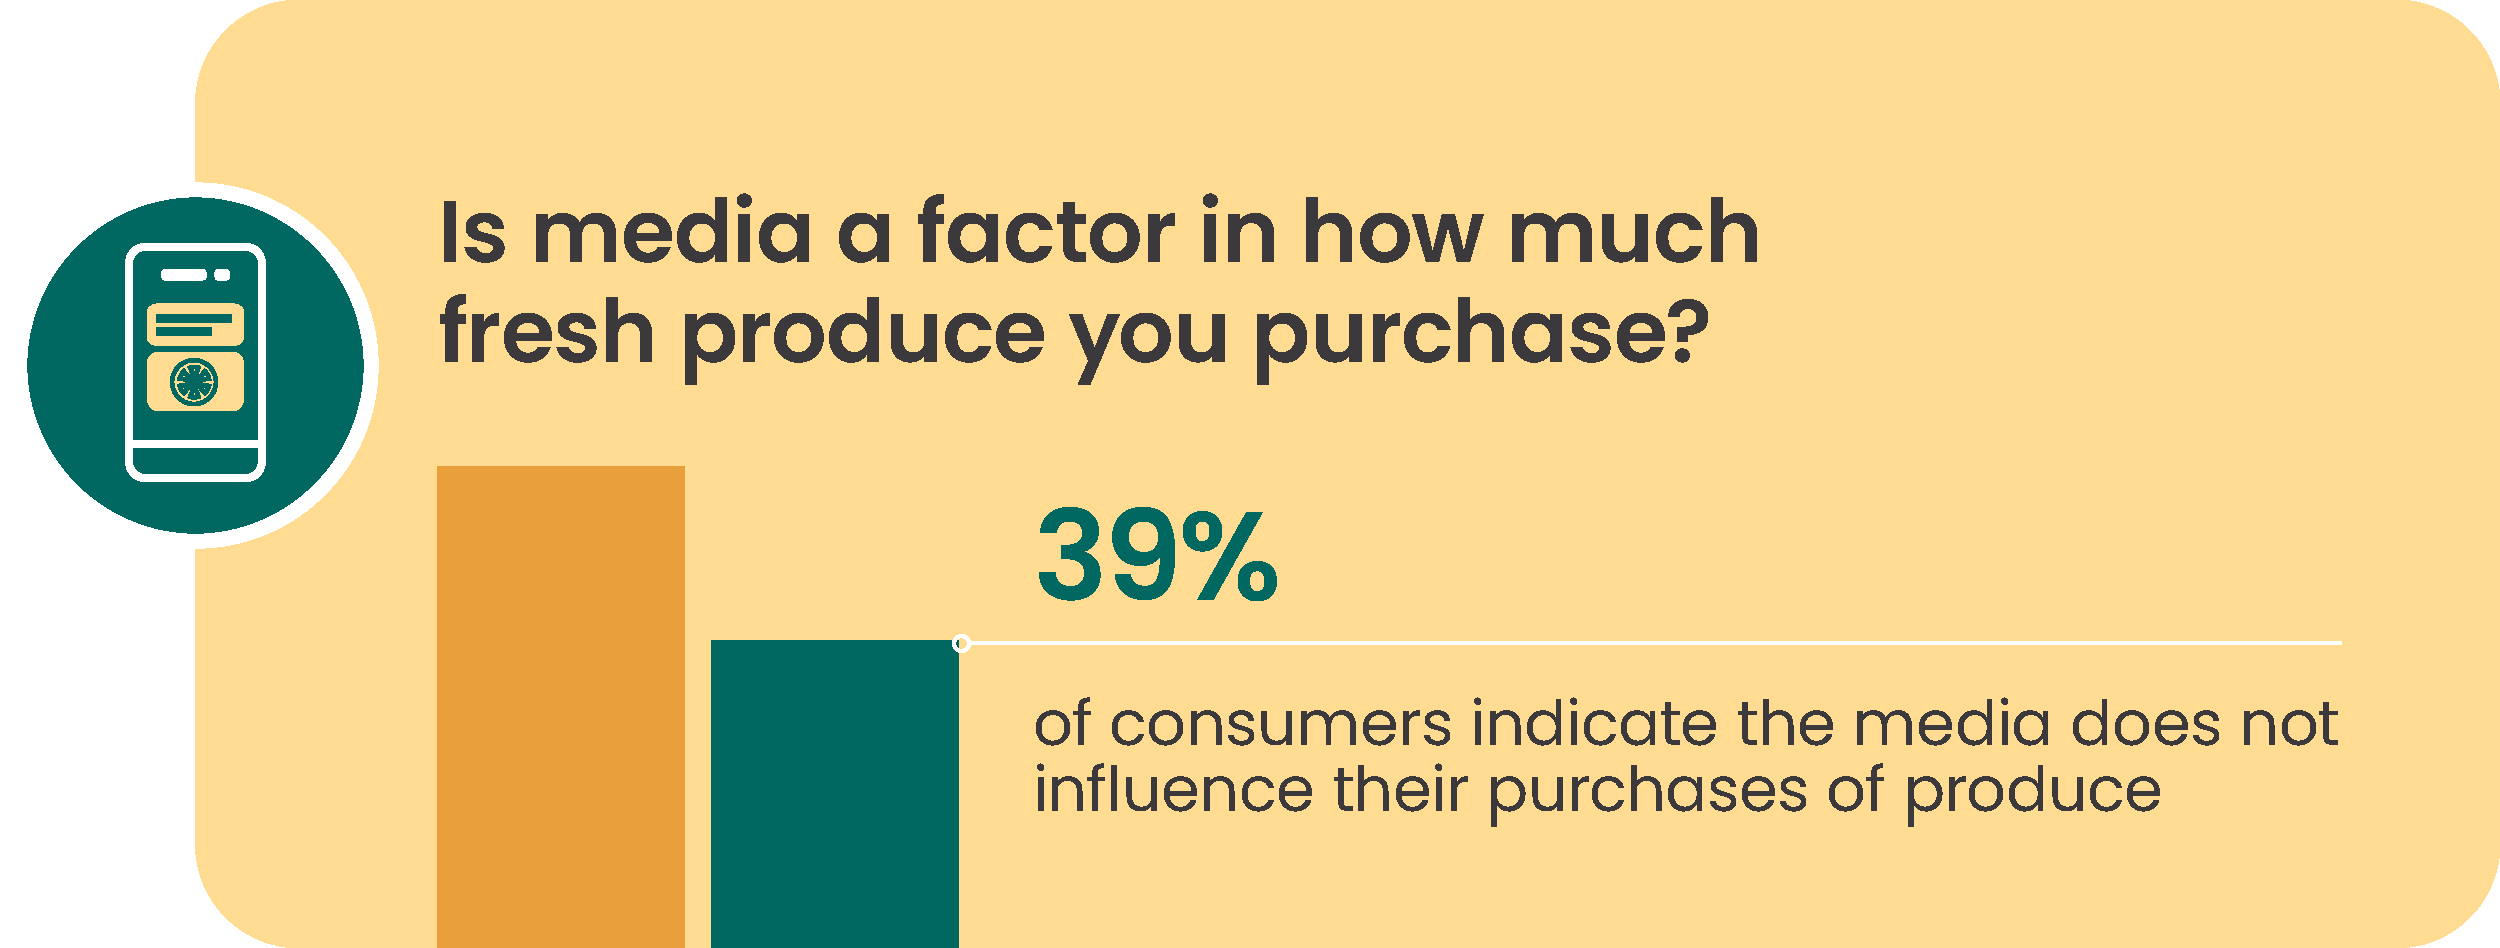 Stat graphic that shows 39% of consumers indicate the media does not influence their purchases of produce